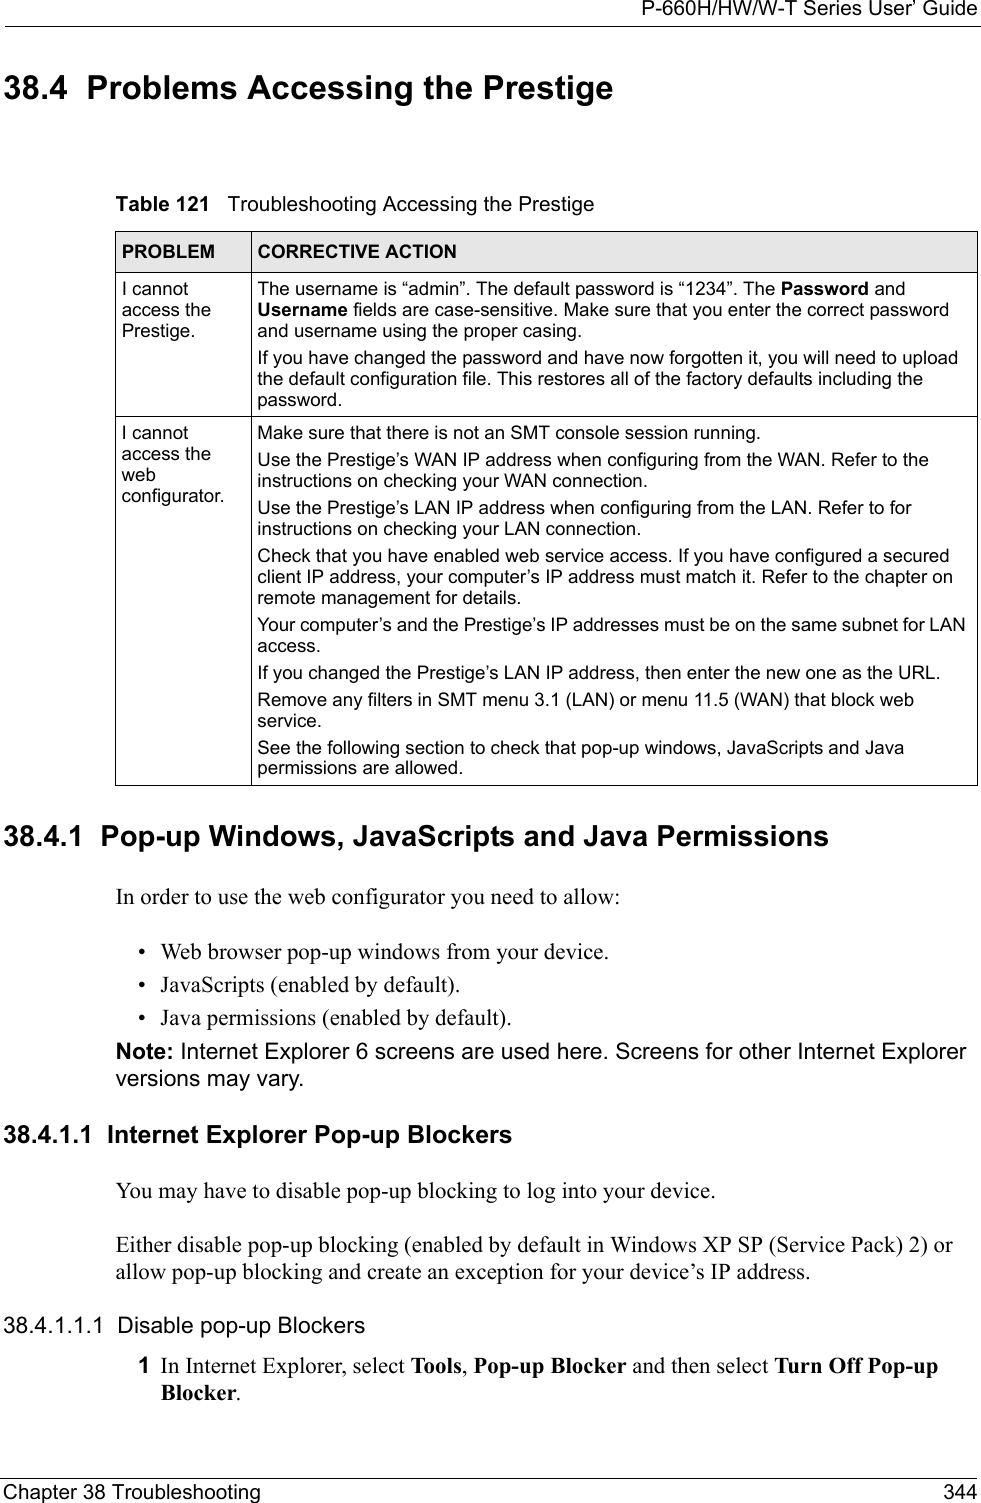 P-660H/HW/W-T Series User’ GuideChapter 38 Troubleshooting 34438.4  Problems Accessing the Prestige38.4.1  Pop-up Windows, JavaScripts and Java Permissions In order to use the web configurator you need to allow:• Web browser pop-up windows from your device.• JavaScripts (enabled by default).• Java permissions (enabled by default).Note: Internet Explorer 6 screens are used here. Screens for other Internet Explorer versions may vary.38.4.1.1  Internet Explorer Pop-up BlockersYou may have to disable pop-up blocking to log into your device. Either disable pop-up blocking (enabled by default in Windows XP SP (Service Pack) 2) or allow pop-up blocking and create an exception for your device’s IP address.38.4.1.1.1  Disable pop-up Blockers1In Internet Explorer, select Tools, Pop-up Blocker and then select Turn Off Pop-up Blocker. Table 121   Troubleshooting Accessing the PrestigePROBLEM CORRECTIVE ACTIONI cannot access the Prestige.The username is “admin”. The default password is “1234”. The Password and Username fields are case-sensitive. Make sure that you enter the correct password and username using the proper casing.If you have changed the password and have now forgotten it, you will need to upload the default configuration file. This restores all of the factory defaults including the password.I cannot access the web configurator.Make sure that there is not an SMT console session running.Use the Prestige’s WAN IP address when configuring from the WAN. Refer to the instructions on checking your WAN connection.Use the Prestige’s LAN IP address when configuring from the LAN. Refer to for instructions on checking your LAN connection.Check that you have enabled web service access. If you have configured a secured client IP address, your computer’s IP address must match it. Refer to the chapter on remote management for details. Your computer’s and the Prestige’s IP addresses must be on the same subnet for LAN access.If you changed the Prestige’s LAN IP address, then enter the new one as the URL.Remove any filters in SMT menu 3.1 (LAN) or menu 11.5 (WAN) that block web service. See the following section to check that pop-up windows, JavaScripts and Java permissions are allowed.